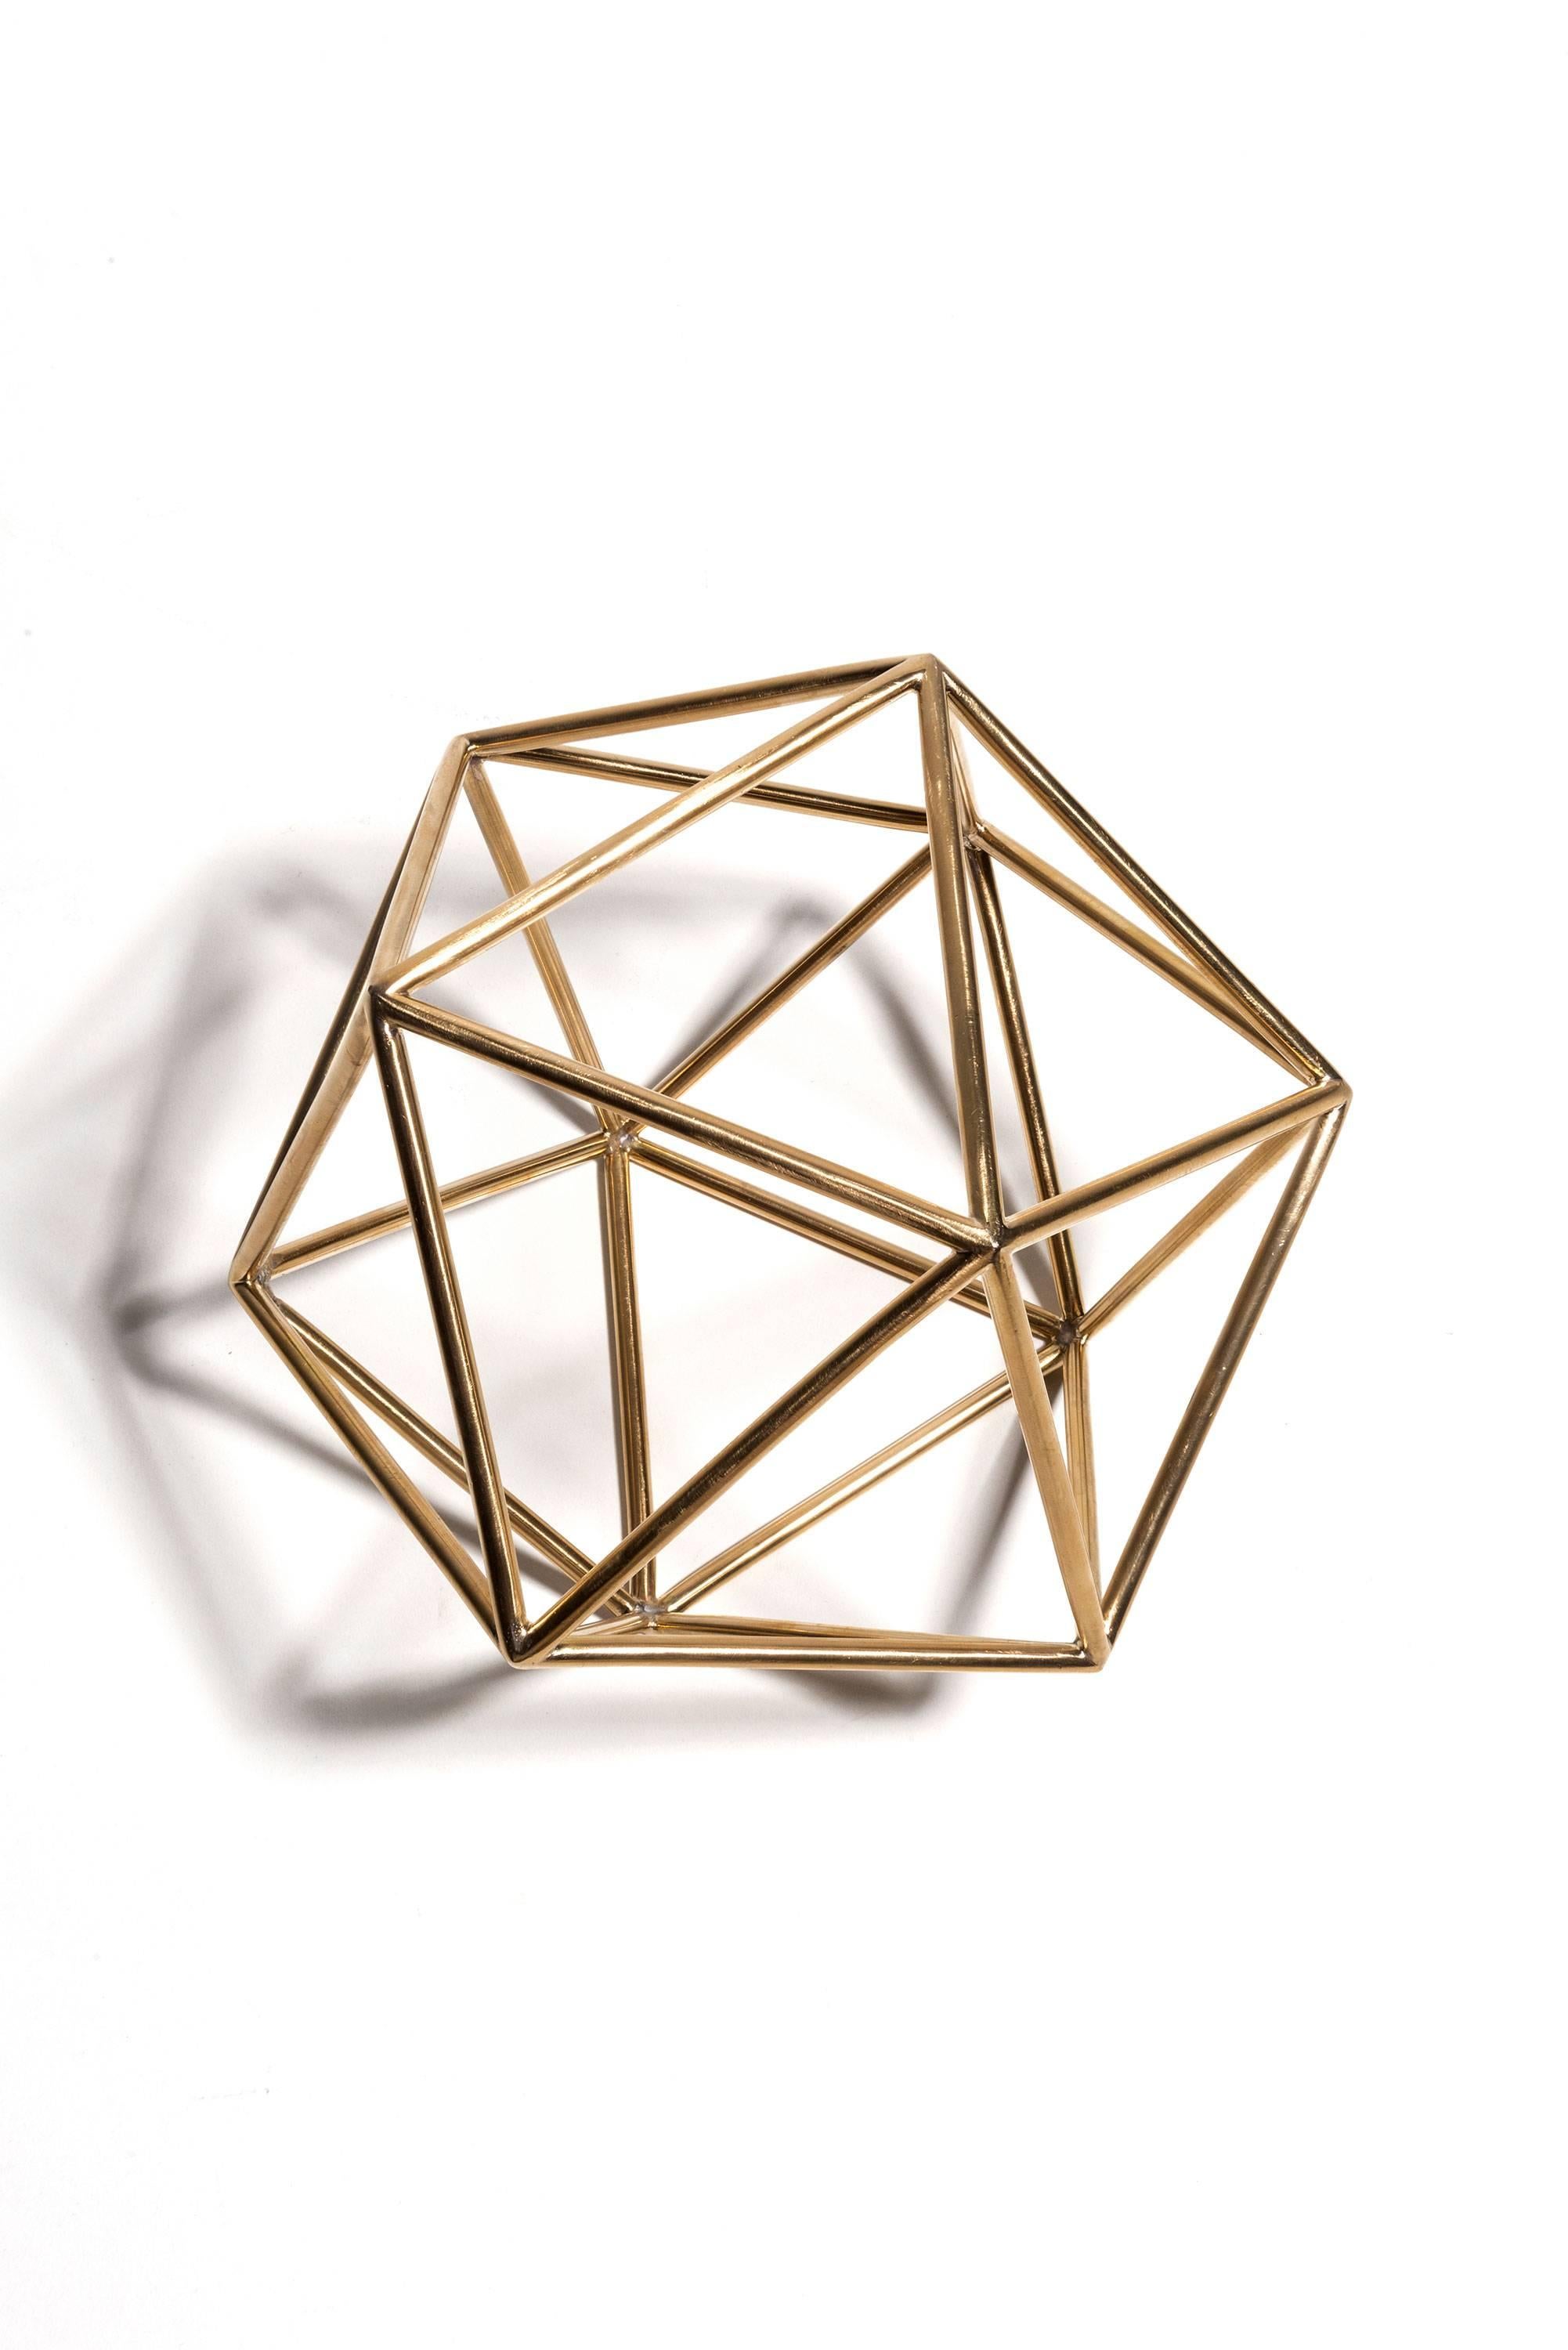 From the Platonic volumes series by Swiss artist Cesare De Vita, brass Icosahedron
Each rod measures 10 cm and has a diameter of 0.5 cm.
More sizes available made to order, rods up to 20 cm and 0.7 cm diameter.